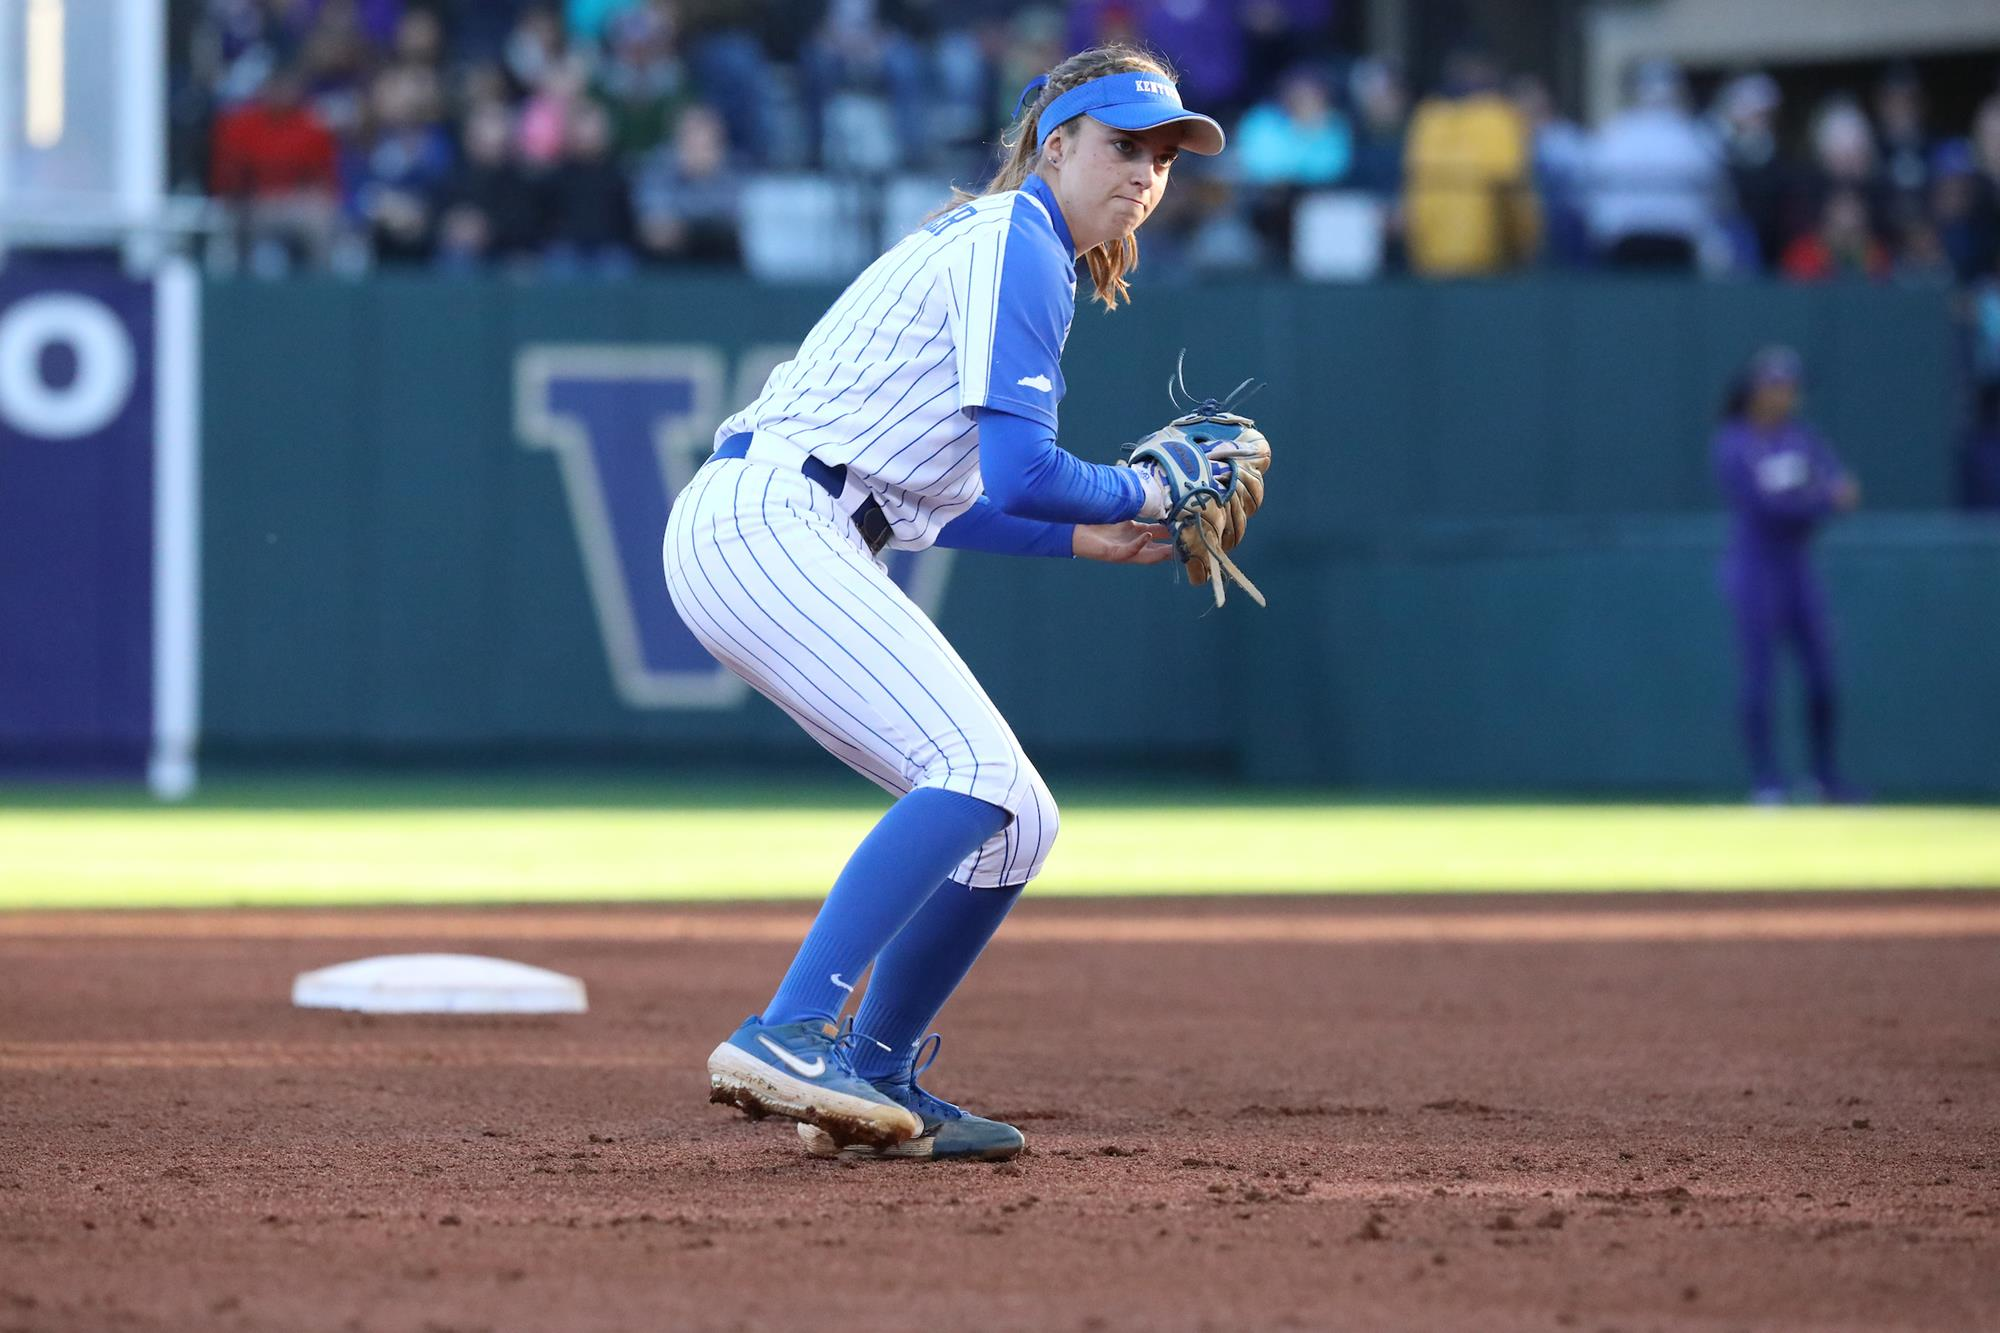 Runners Left on Base Costs Kentucky as Aggies Even Series